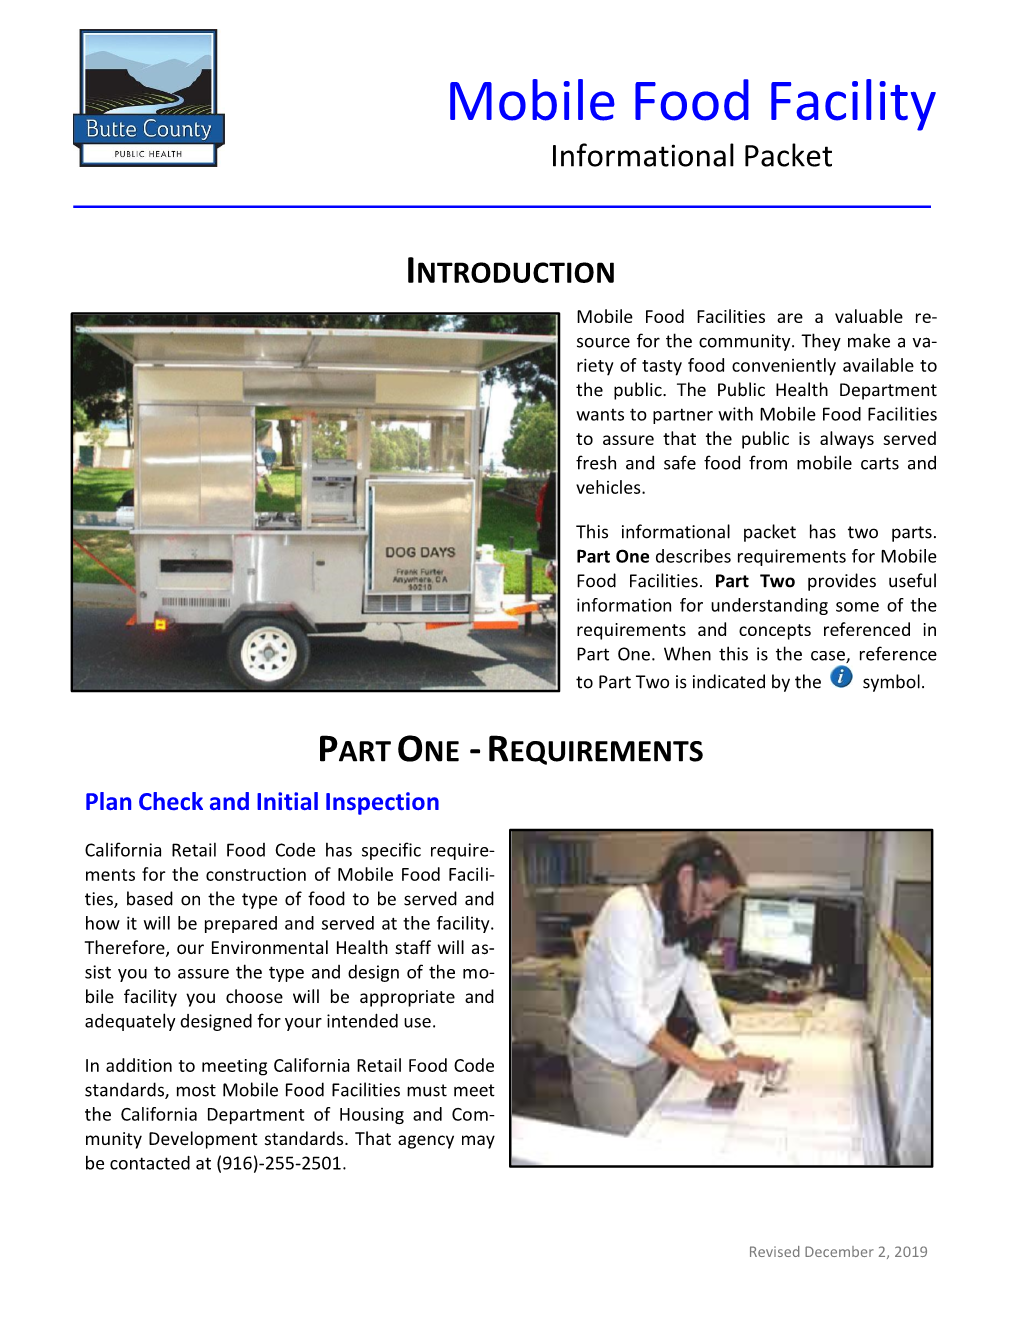 Mobile Food Facility Informational Packet